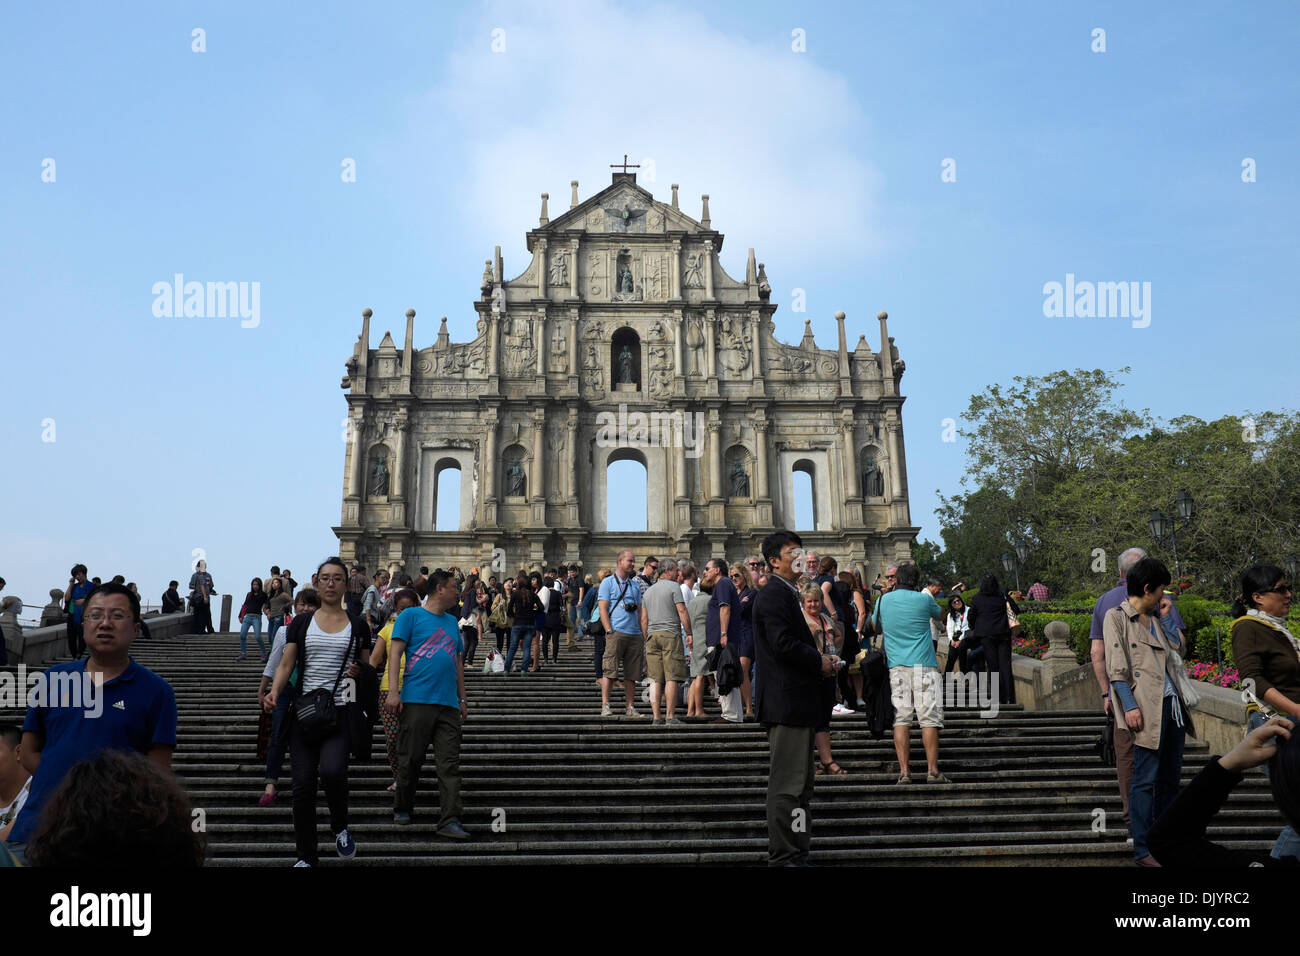 Tourists at The Ruins of St. Paul in Macau, China Stock Photo